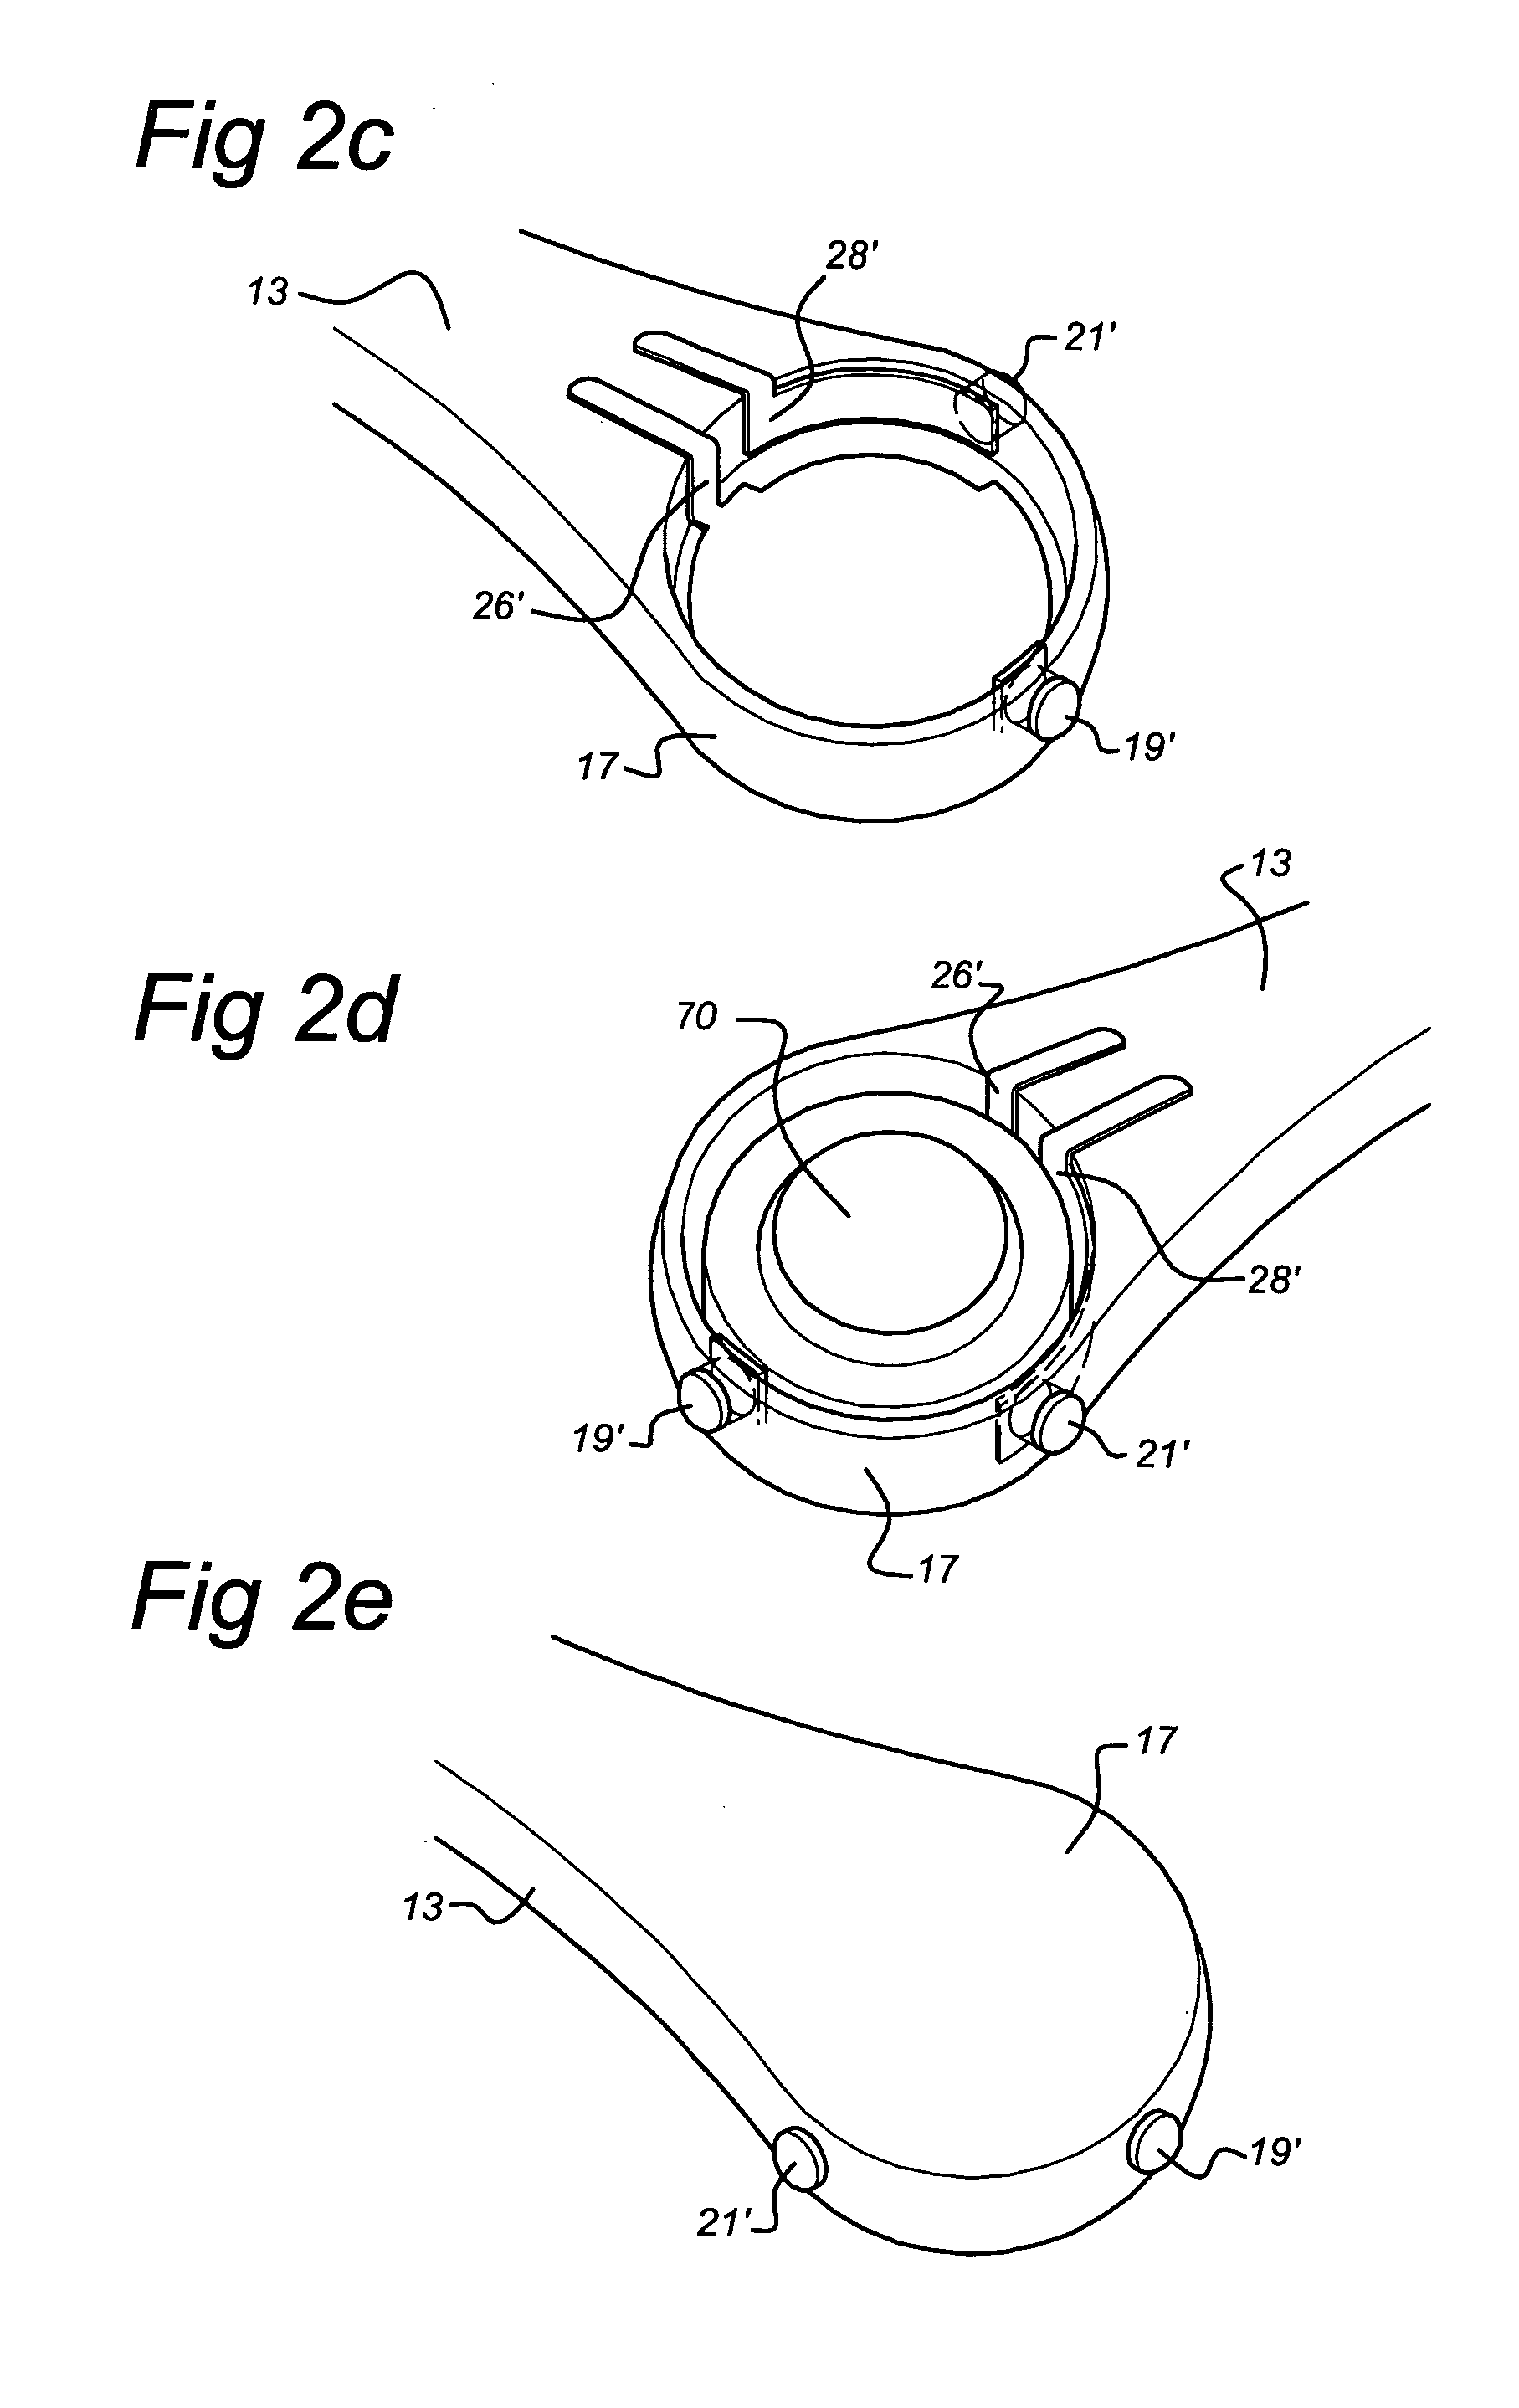 Connector assembly for connecting an earpiece of a hearing aid to glasses temple